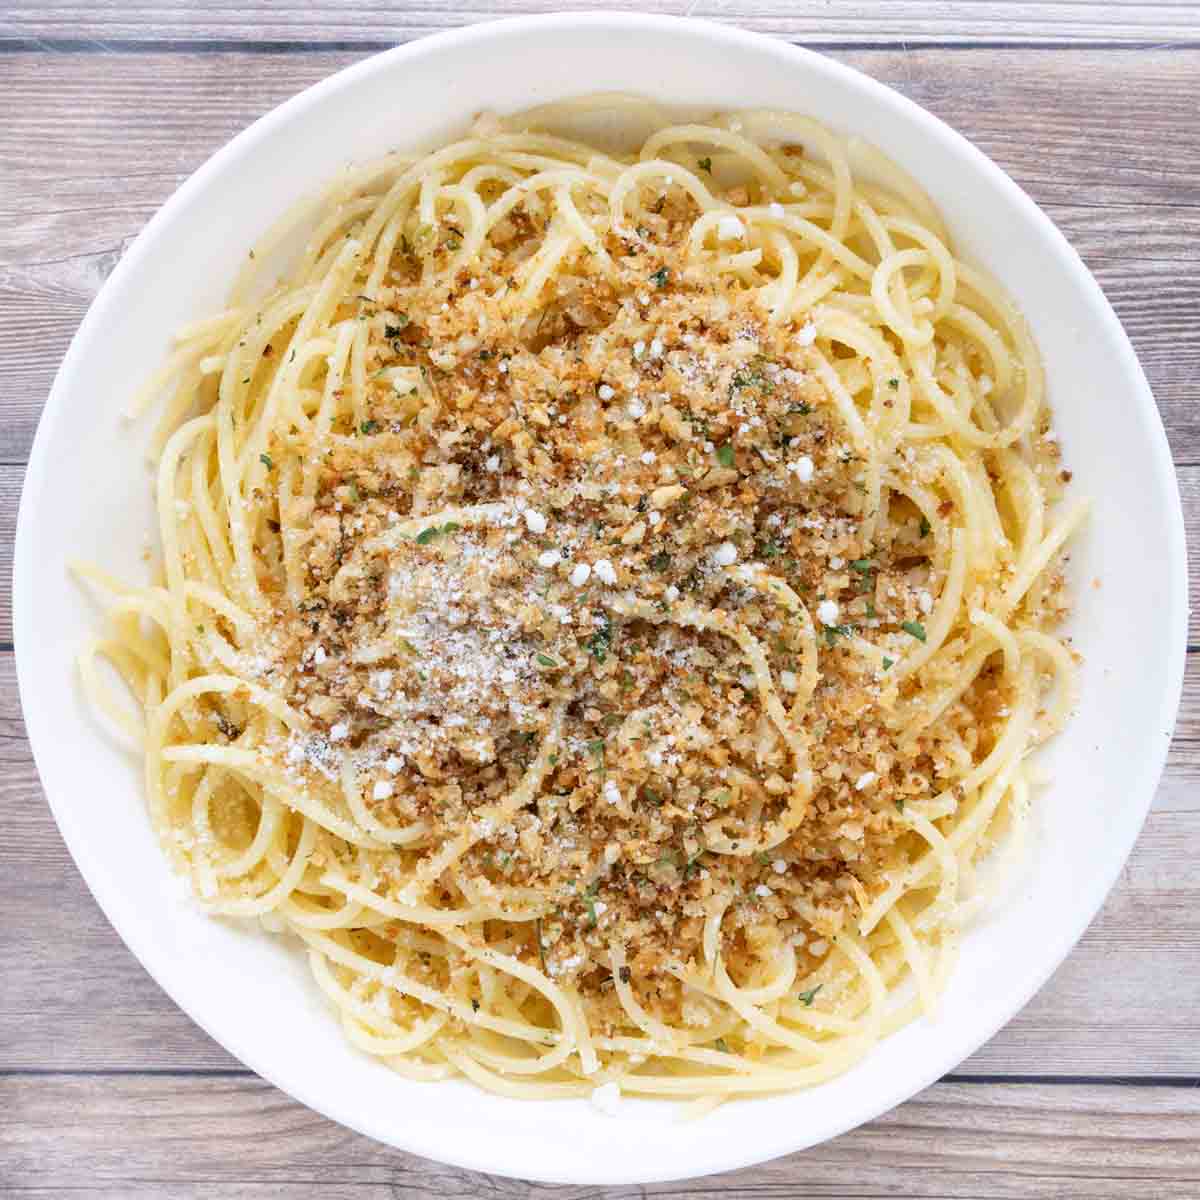 Spaghetti with pangrattato and grated cheese in a white bowl.